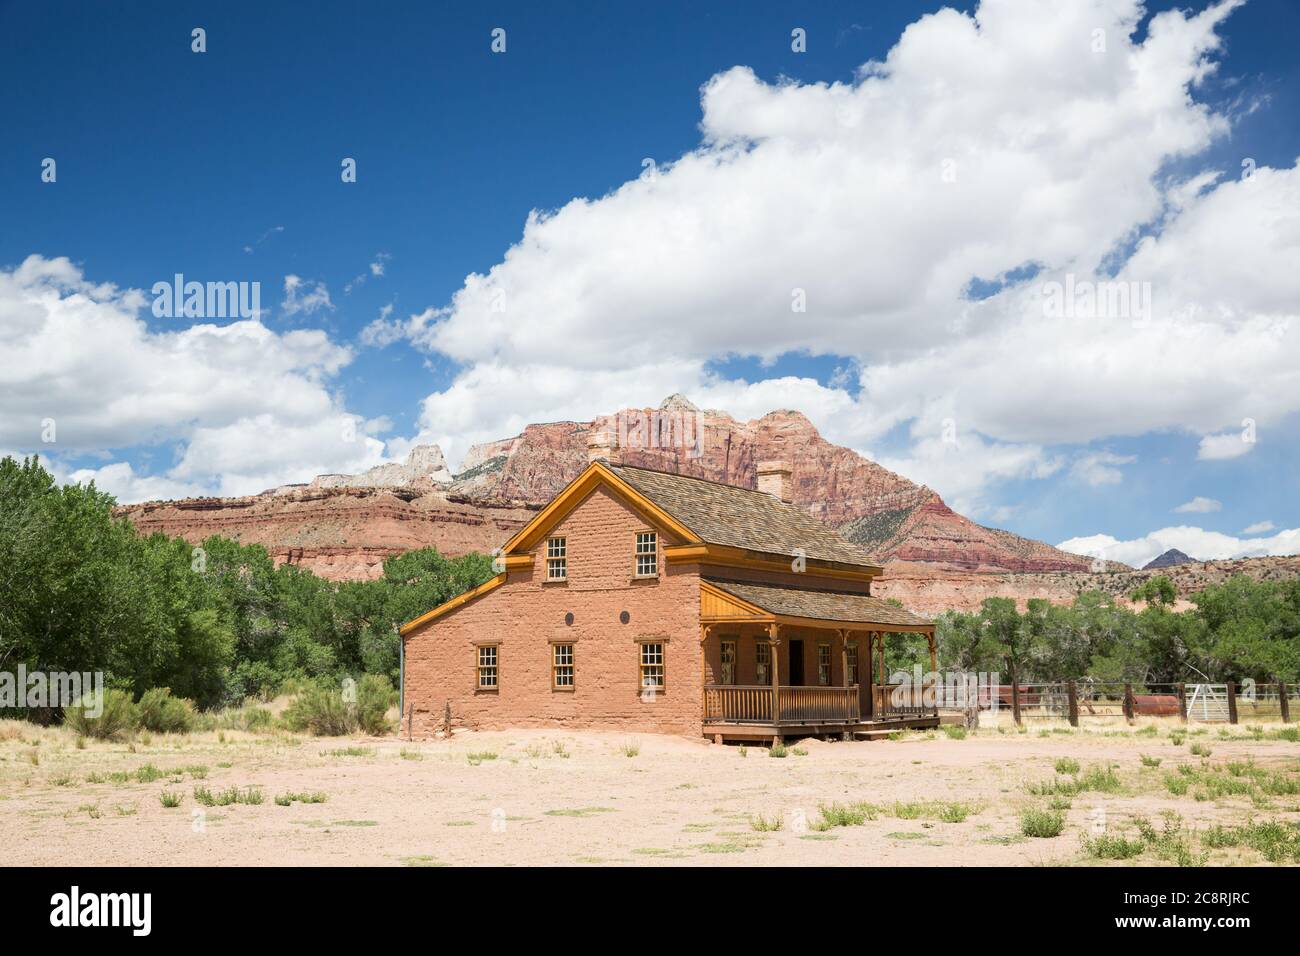 Large home from 1800's pioneer settlement in Utah Ghost Town. The building has been restored to original condition from nearly 150 years ago. Stock Photo